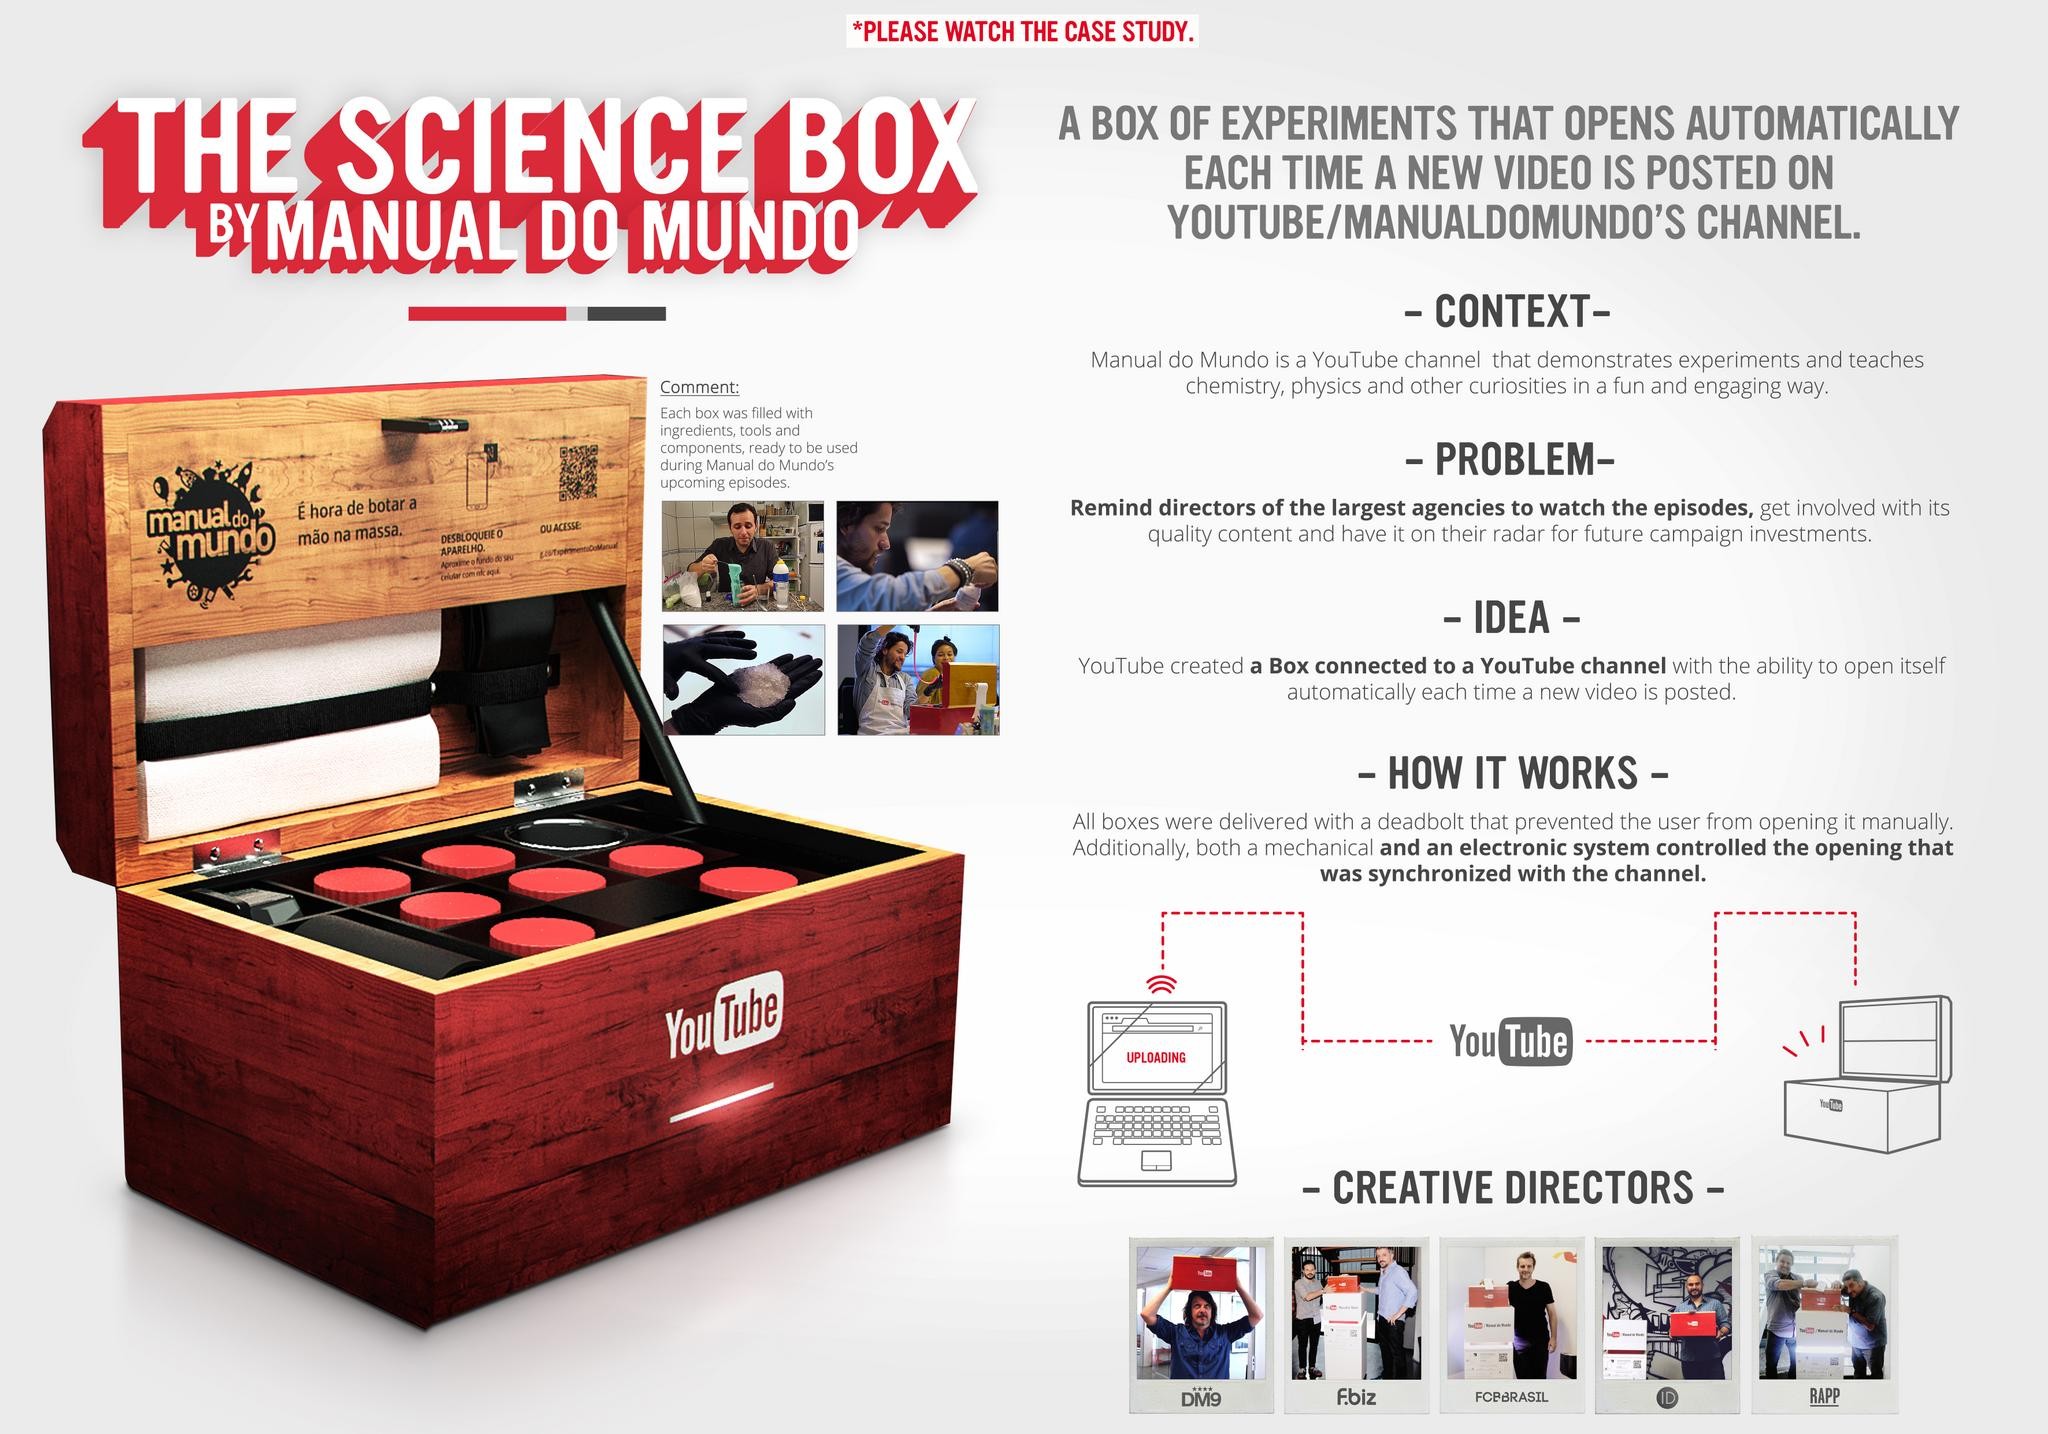 THE SCIENCE BOX